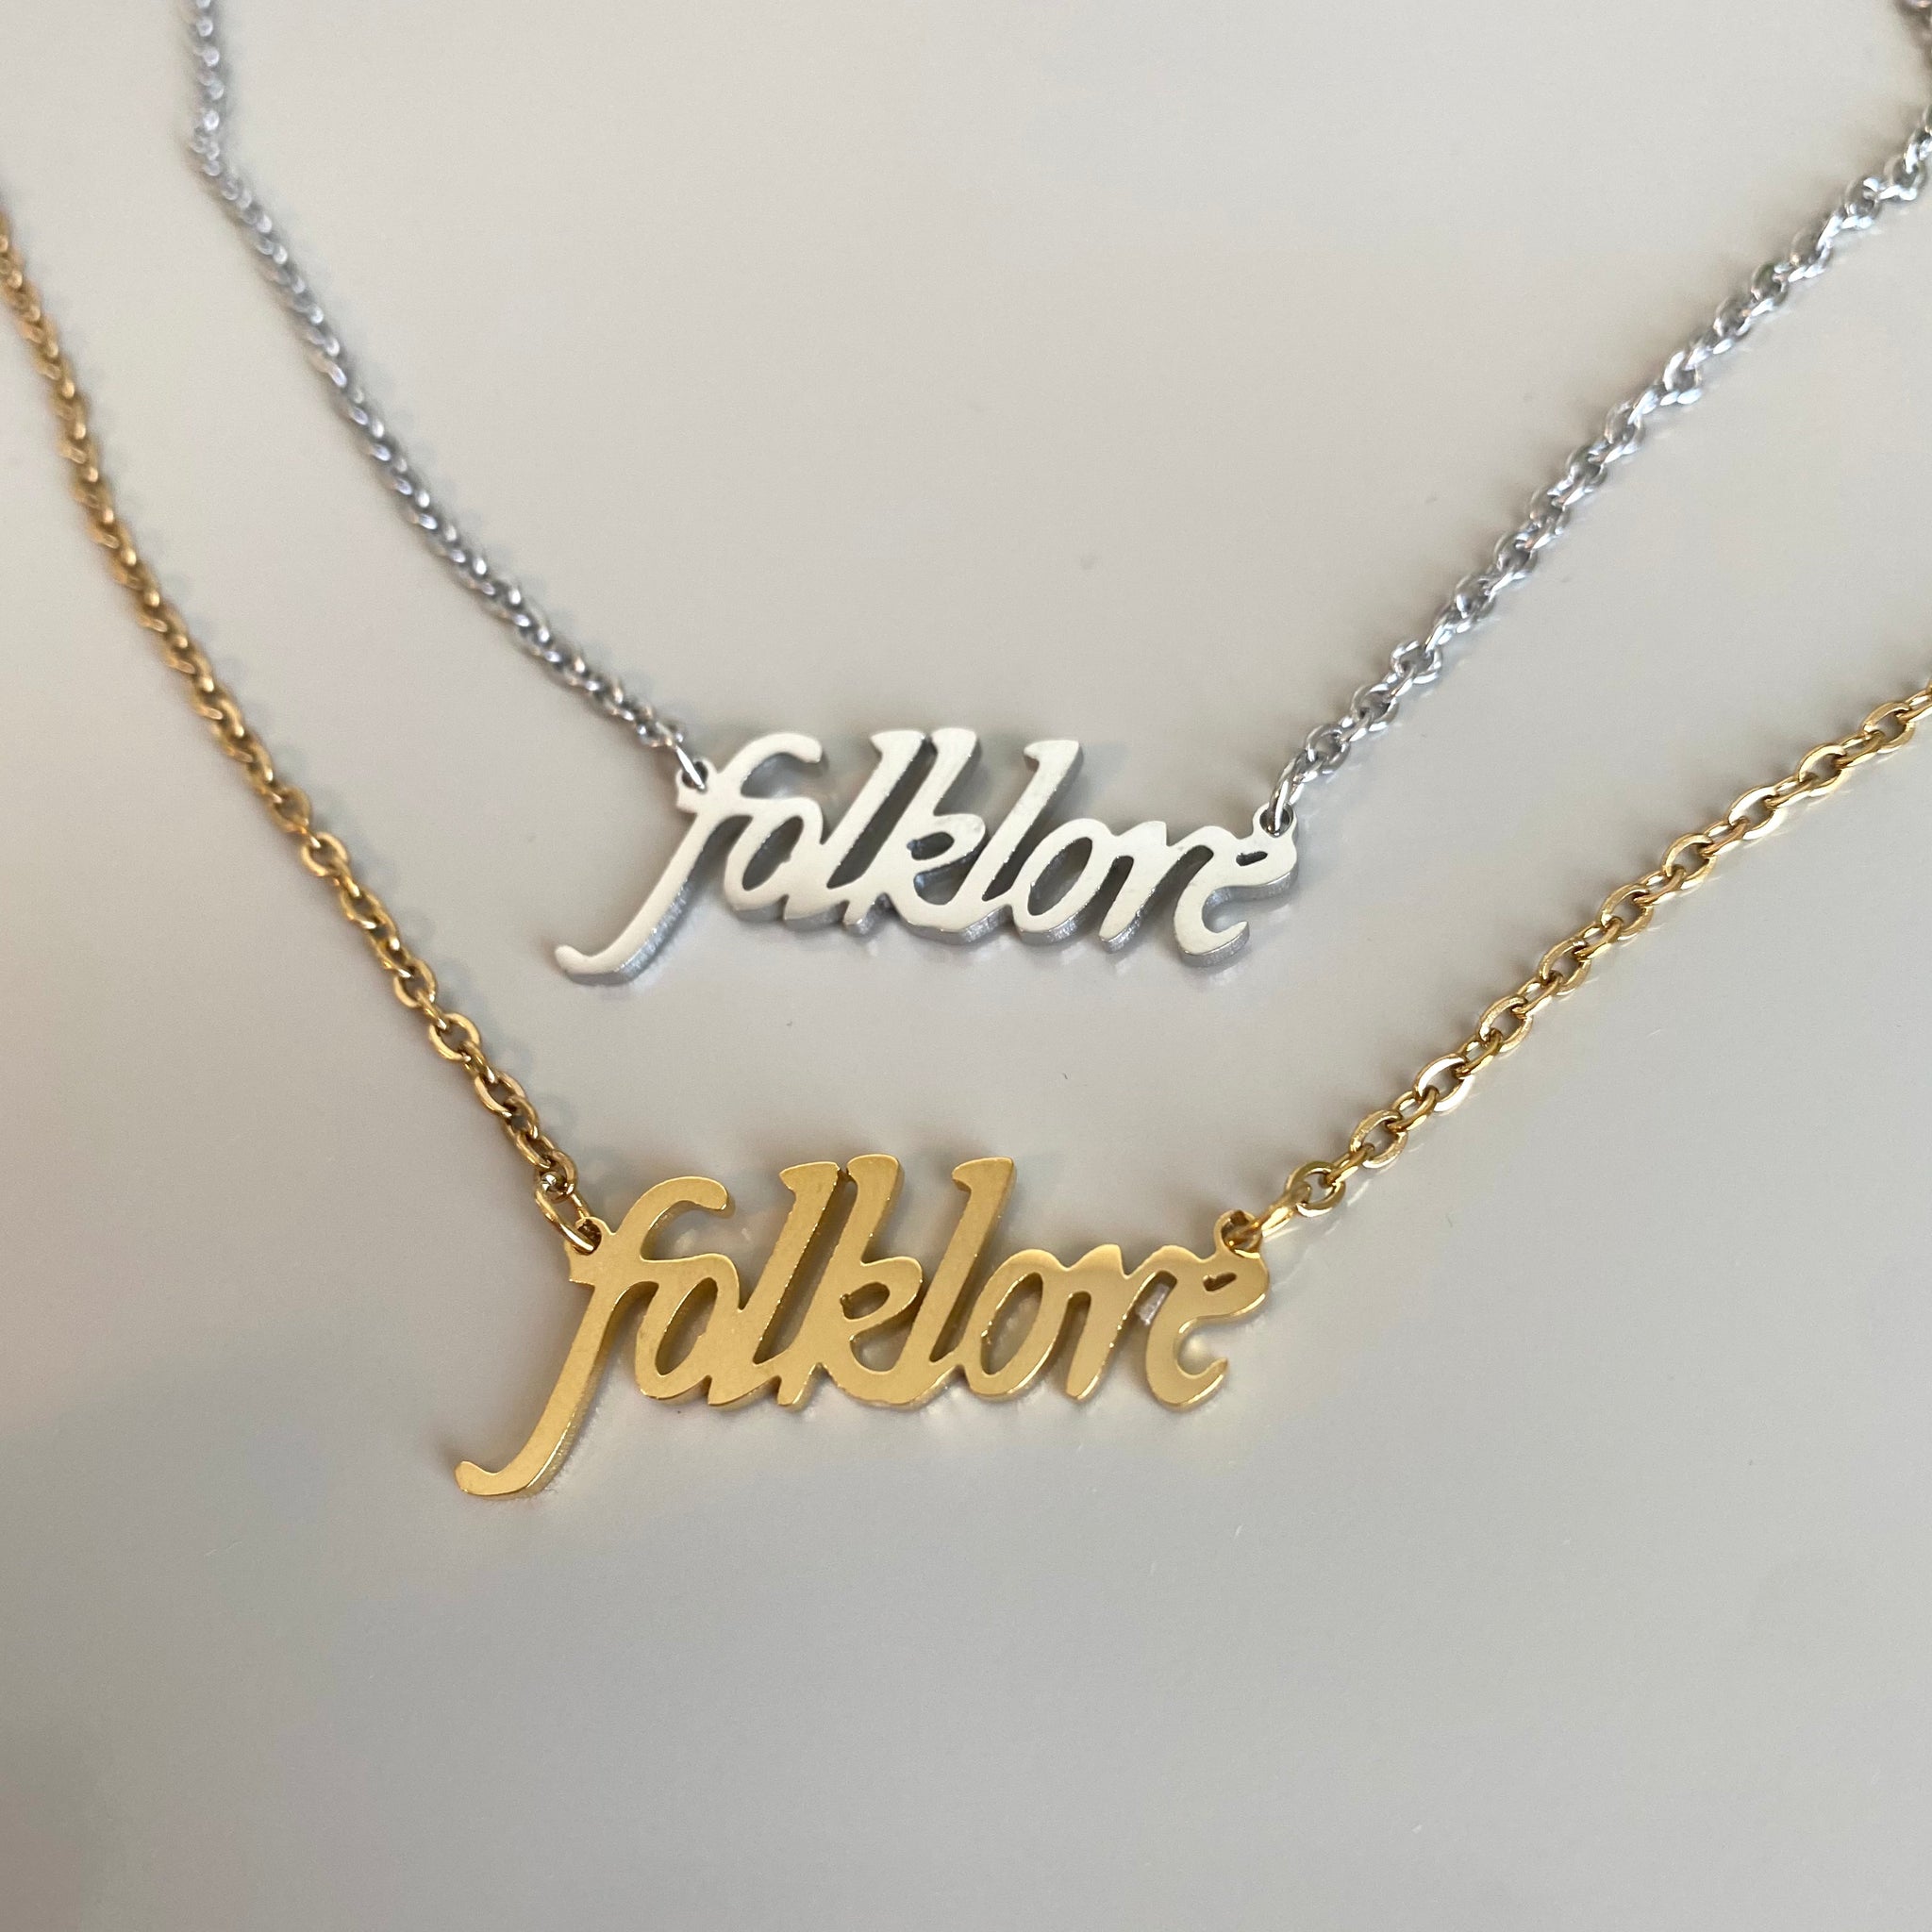 Folklore Necklace